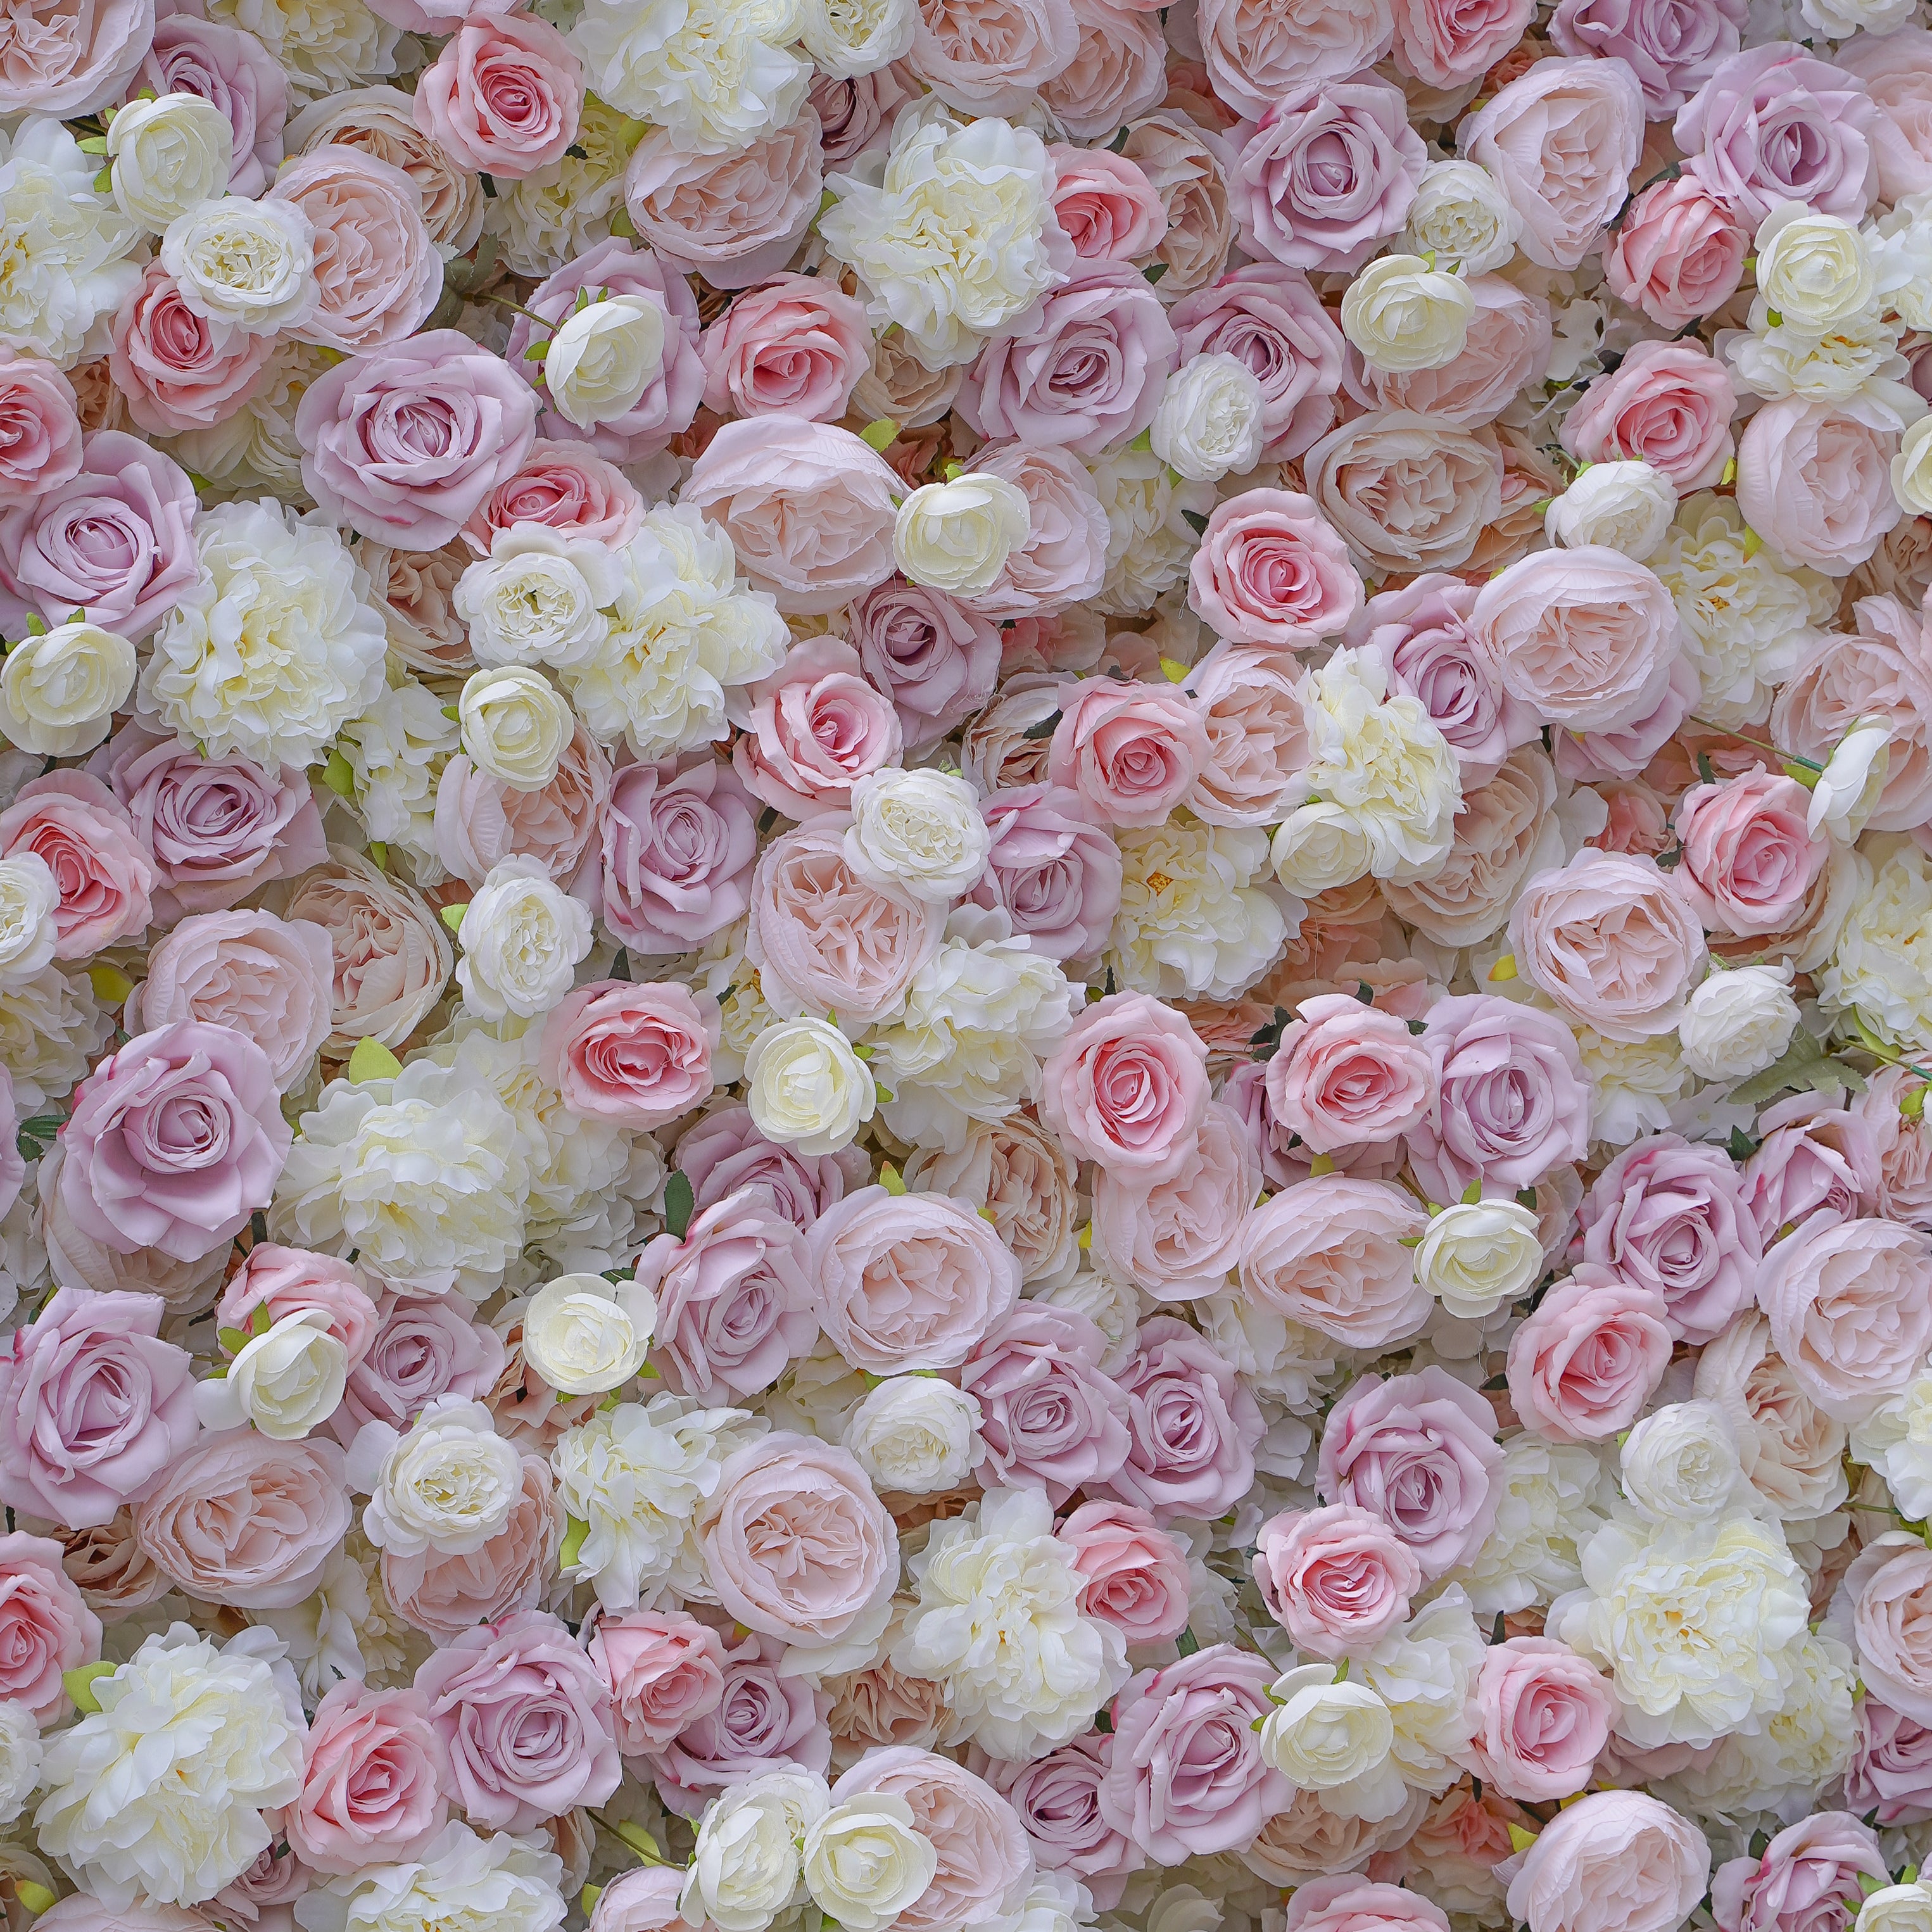 Hannah:  5D Fabric Artificial Flower Wall Rolling Up Curtain Flower Wall R013 - 8ft*8ft Rose Morning